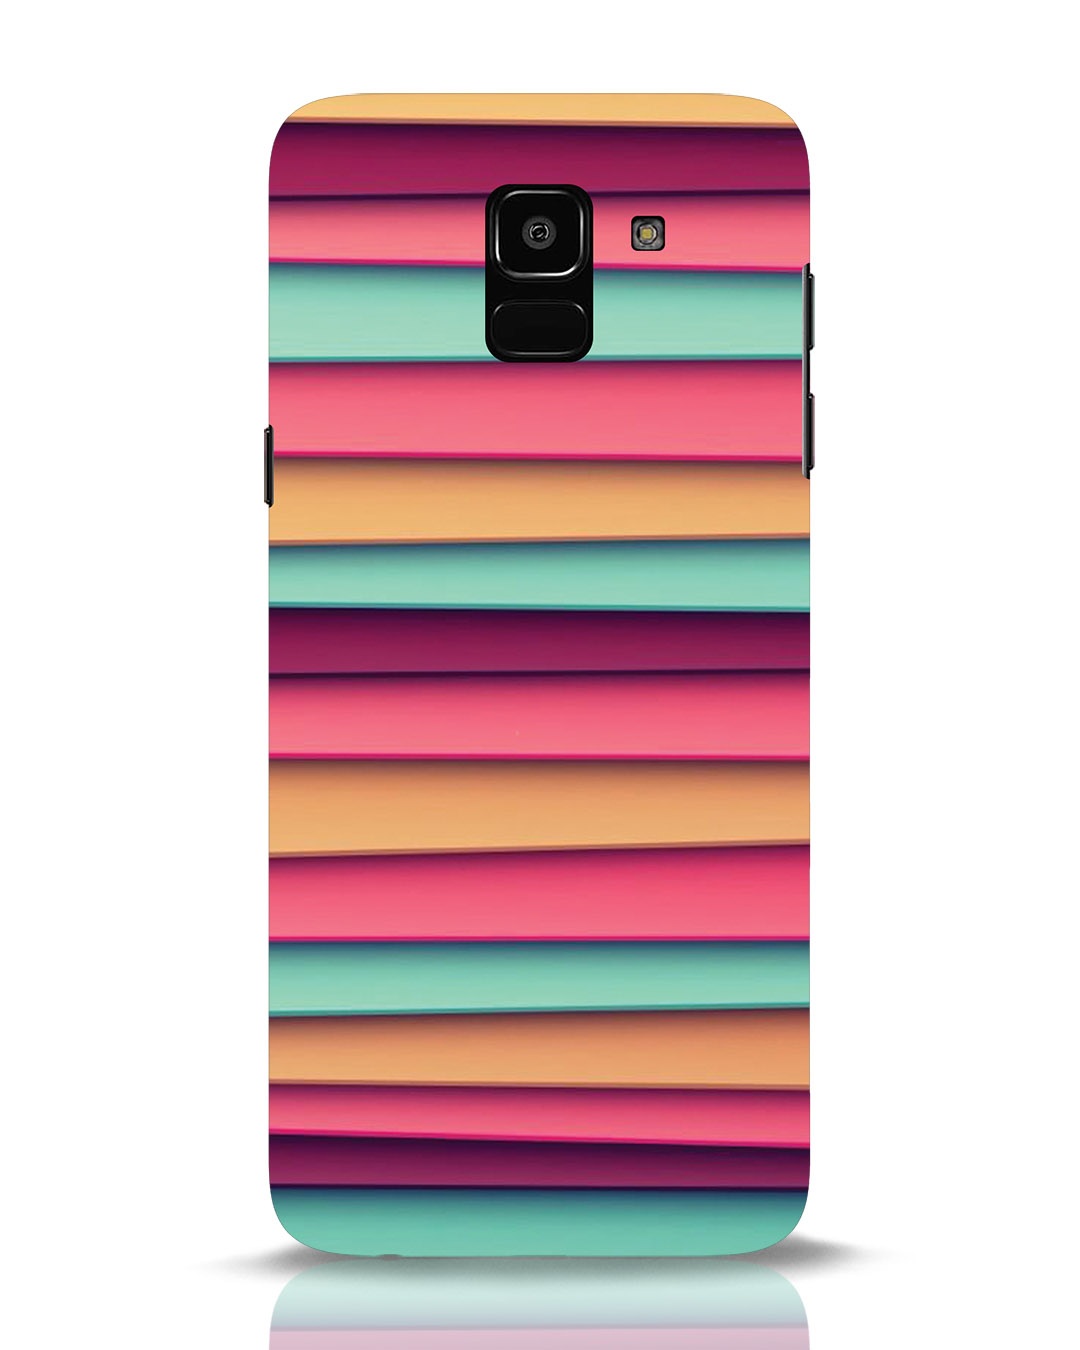 Buy Colorful Blinds Samsung Galaxy J6 Mobile Cover For Unisex Samsung Galaxy J6 Online At Bewakoof 4497